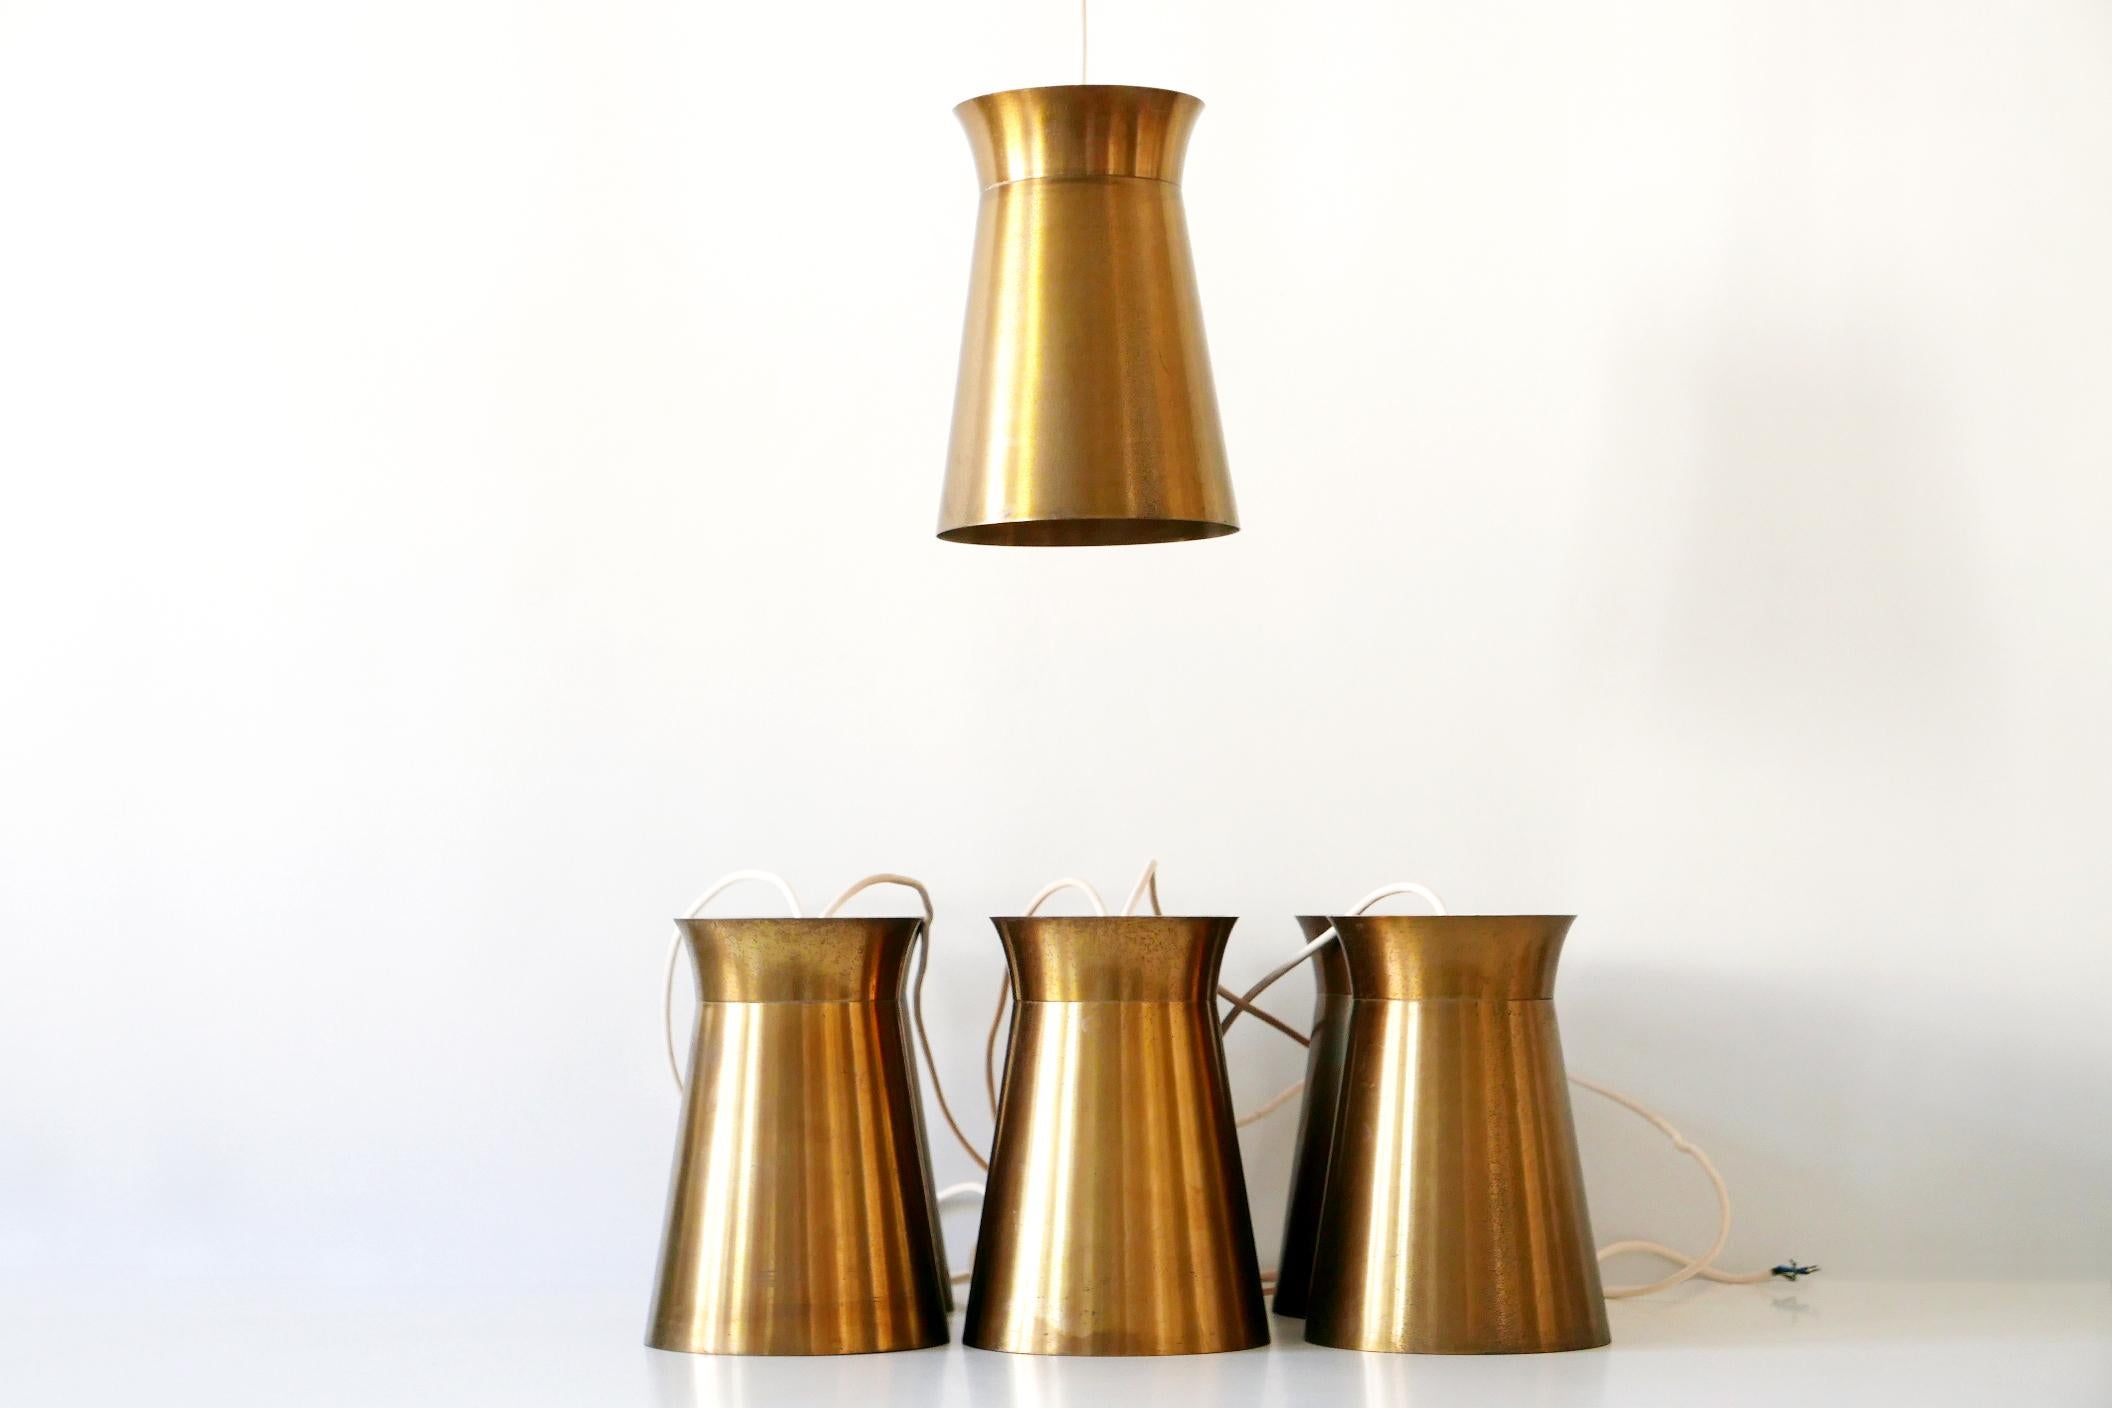 Elegant Mid-Century Modern Brass Pendant Lamps or Hanging Lights, 1950s, Germany For Sale 10